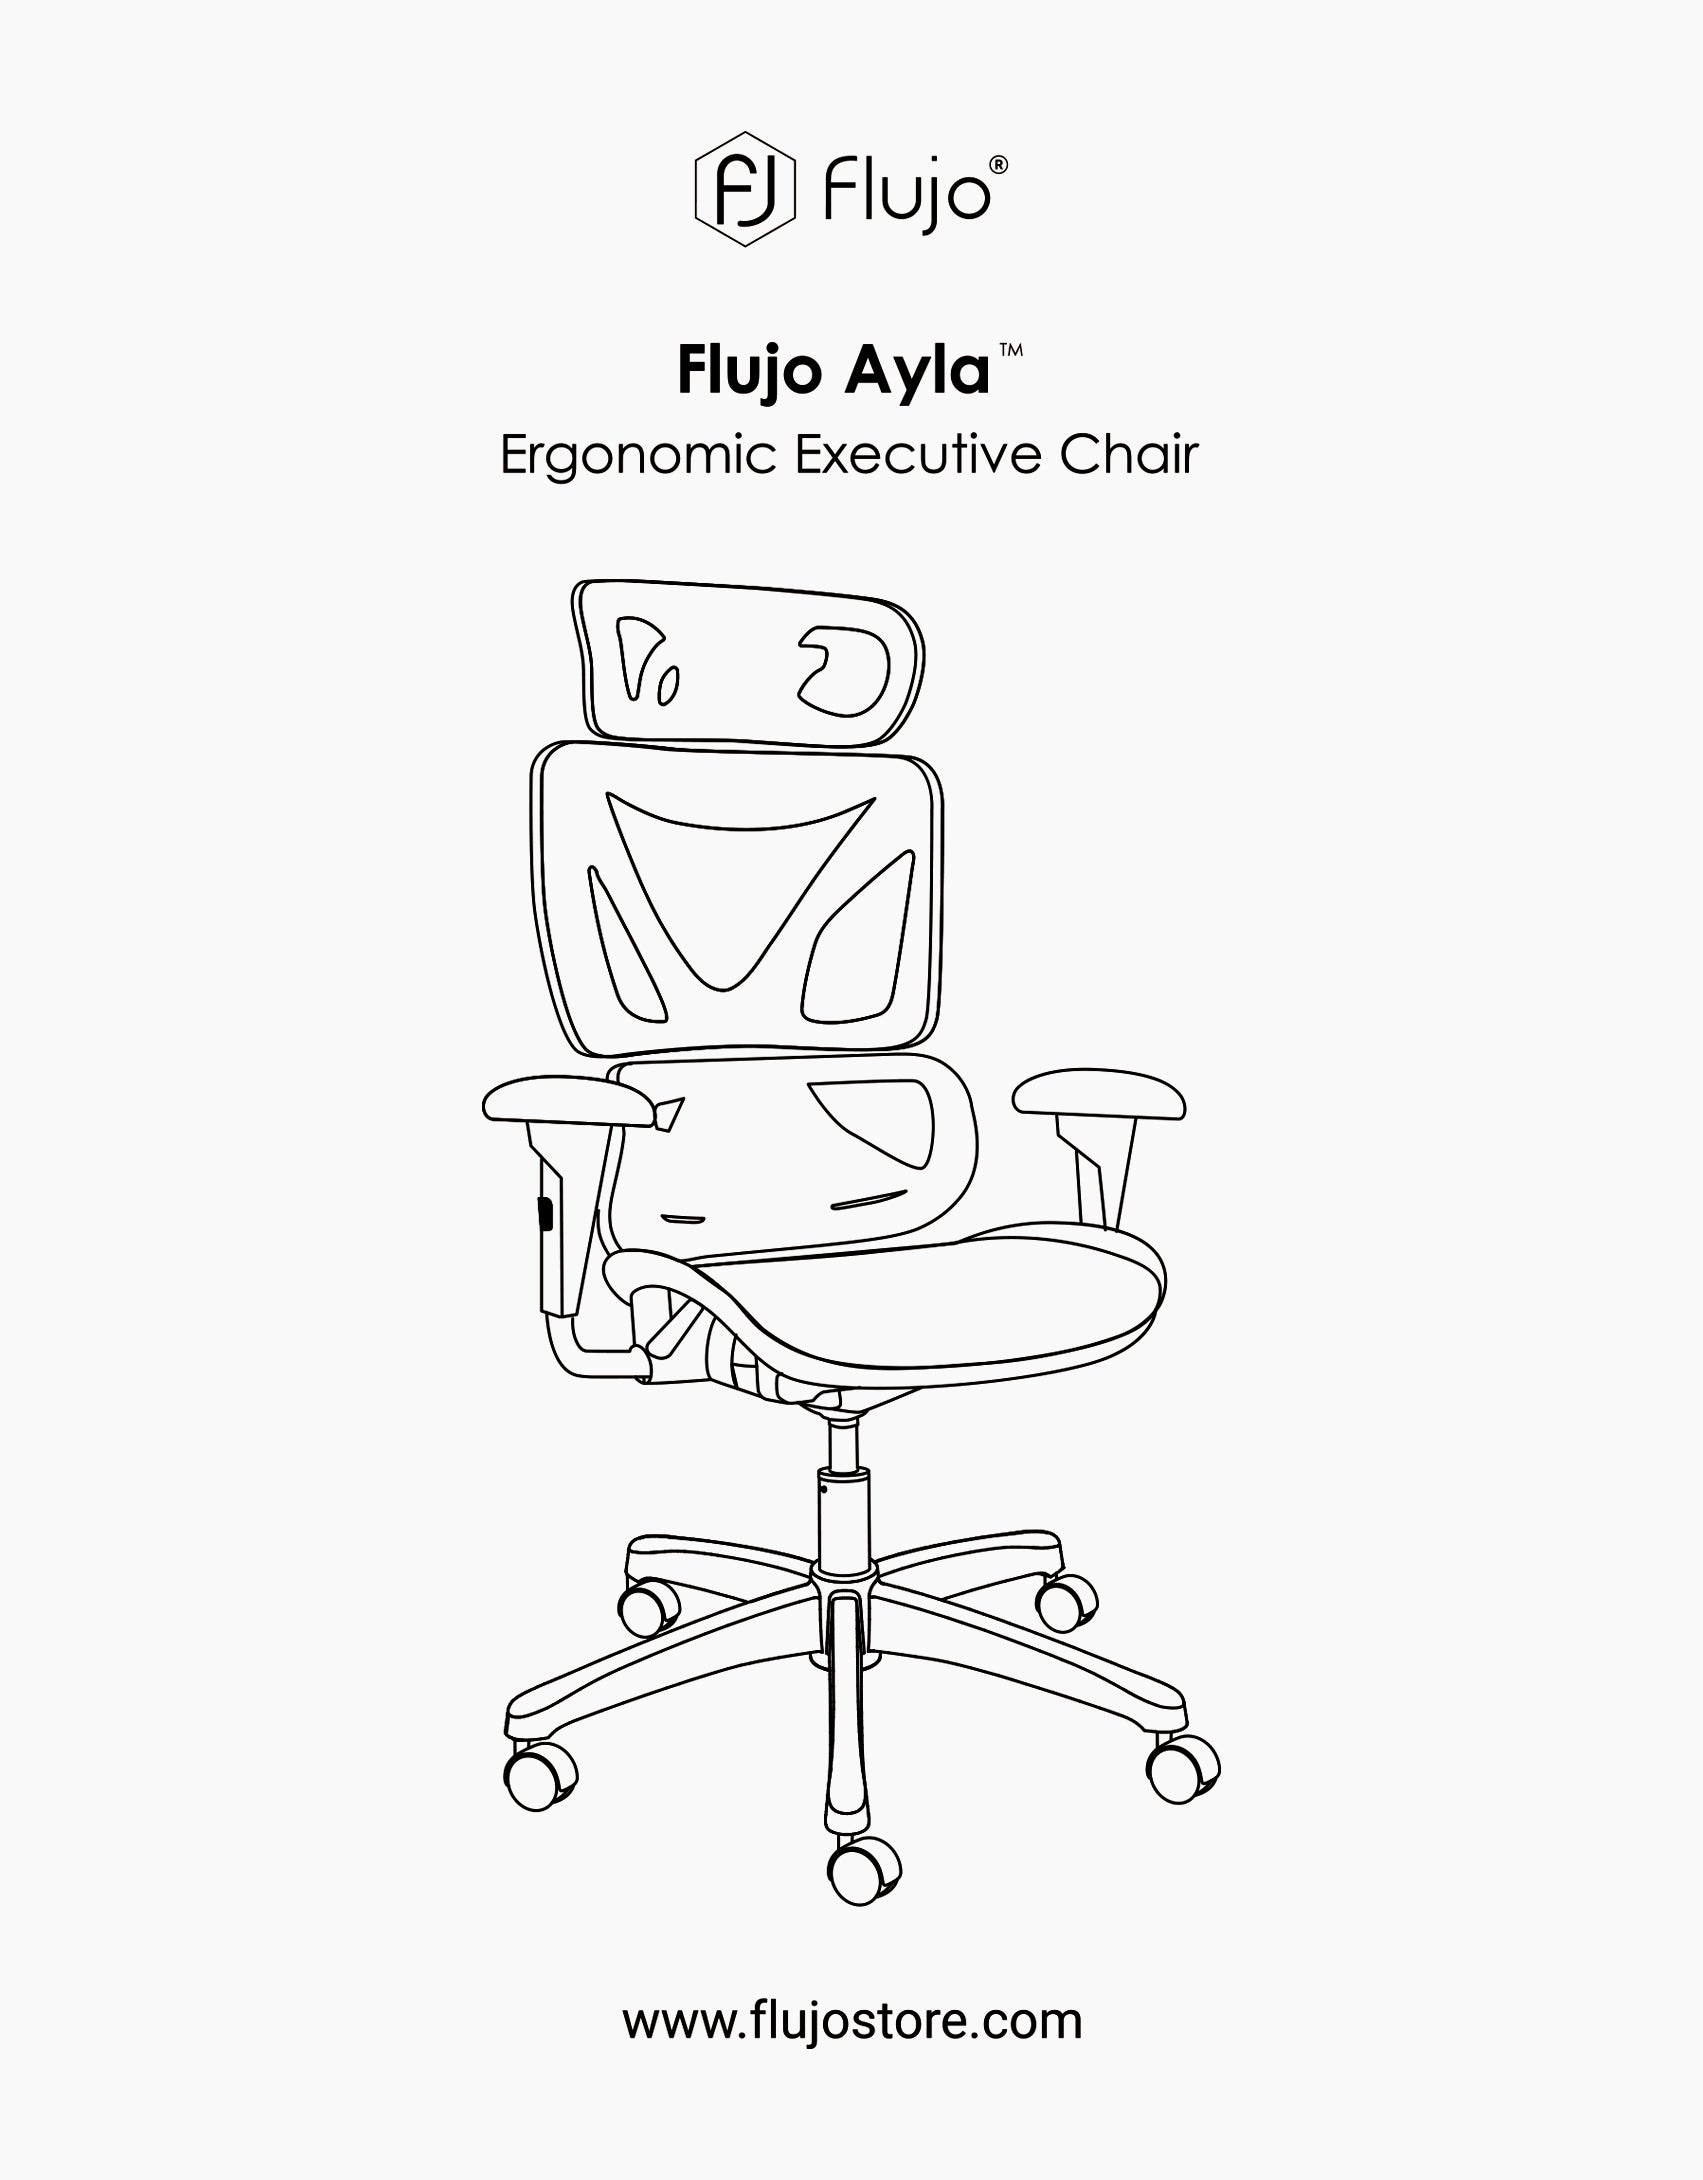 Line drawing of the Flujo Ayla™ Ergonomic Executive Chair showing a comfortable design with adjustable armrests and a high backrest, on the Flujo official website.